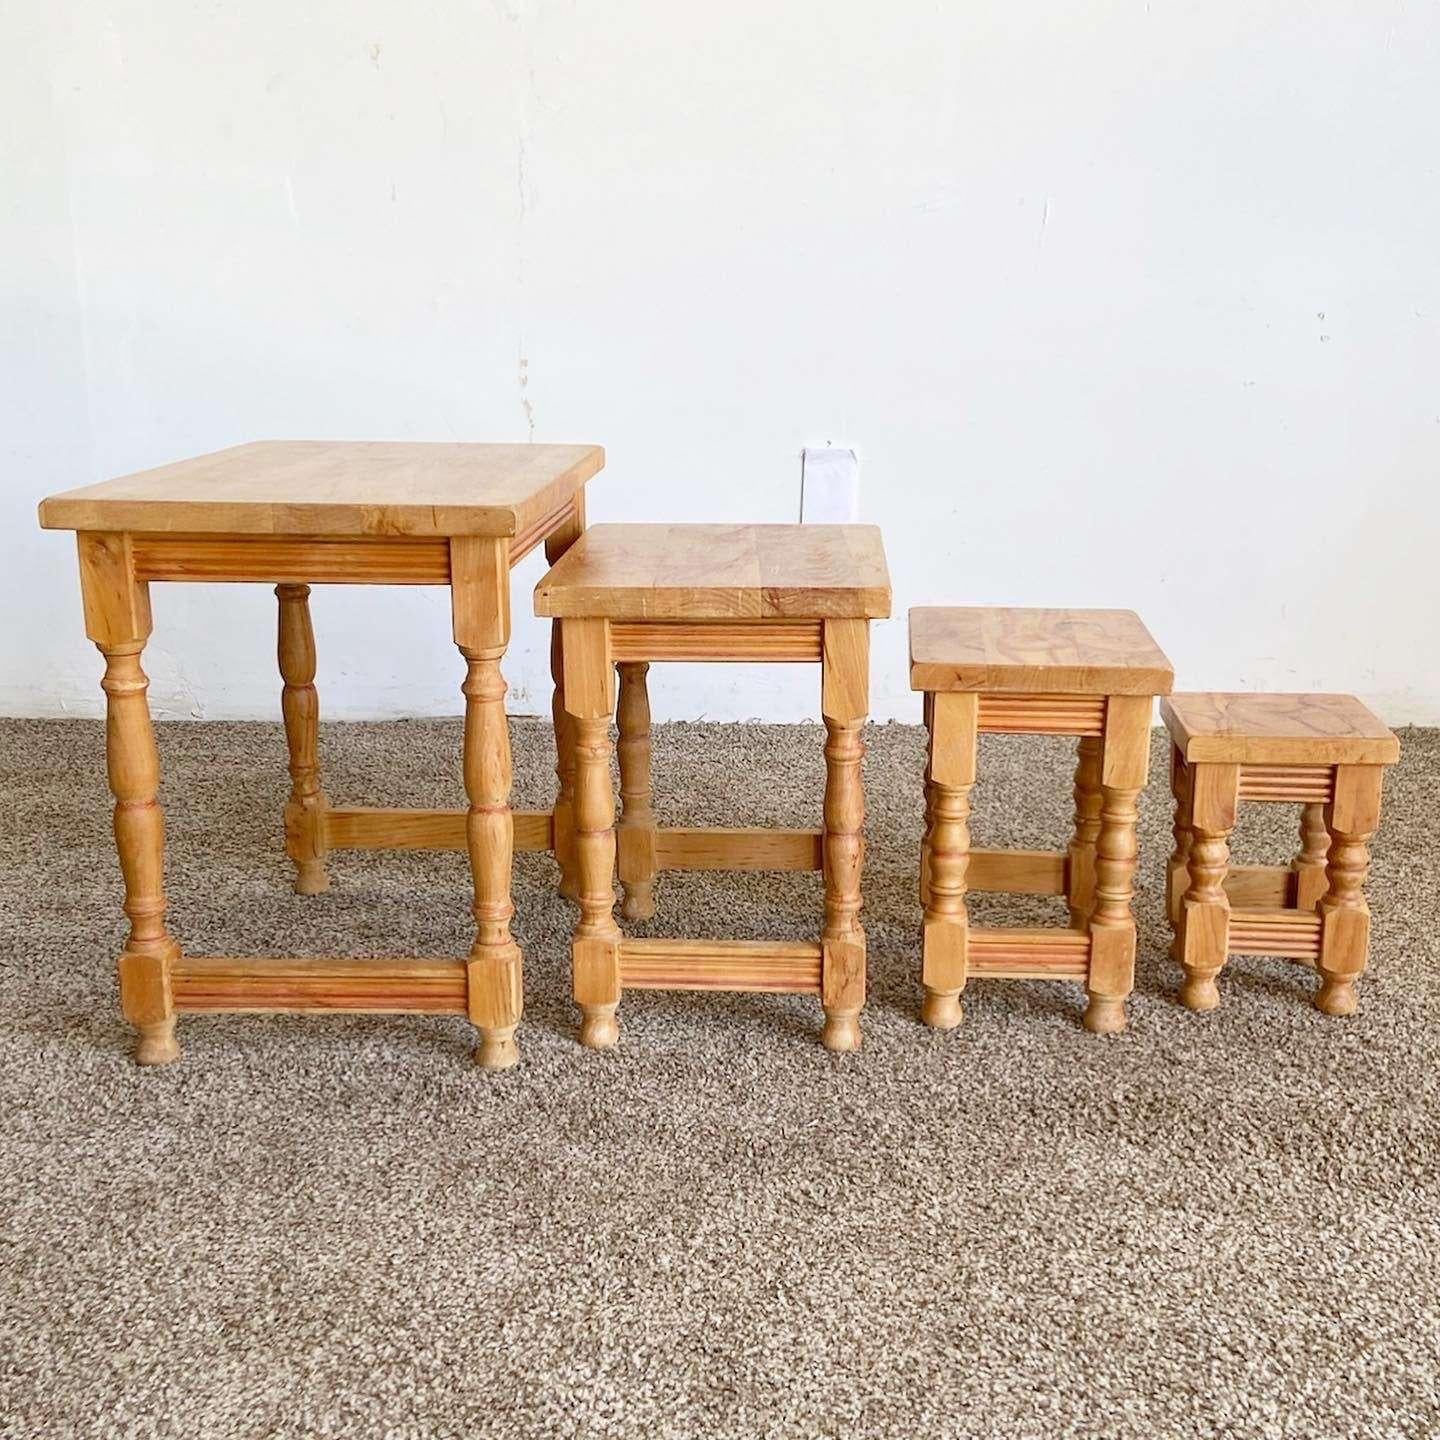 Incredible set of 4 vintage wooden nesting tables. Table base are of a traditional farmhouse style. The tops of each table display hand drawn female faces and bodies absent of clothing. Each are signed by Mordis.

Smallest measures 7.75”W,